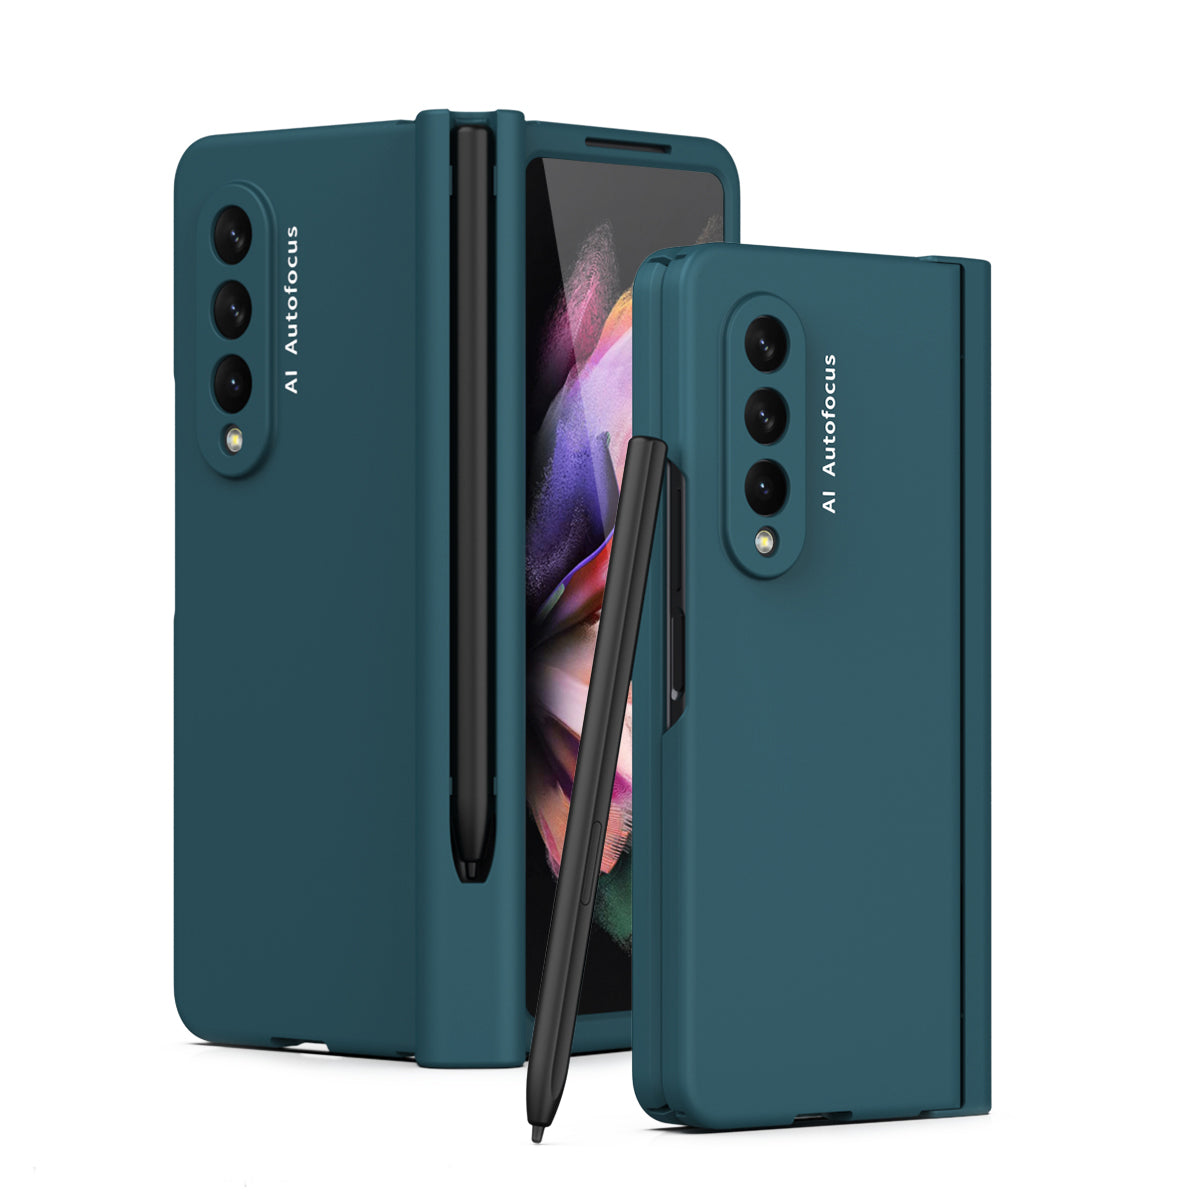 Folding All-inclusive Super Protective Case With Front Tempered Glass Film Hinge S Pen Slot For Galaxy Fold 3 5G